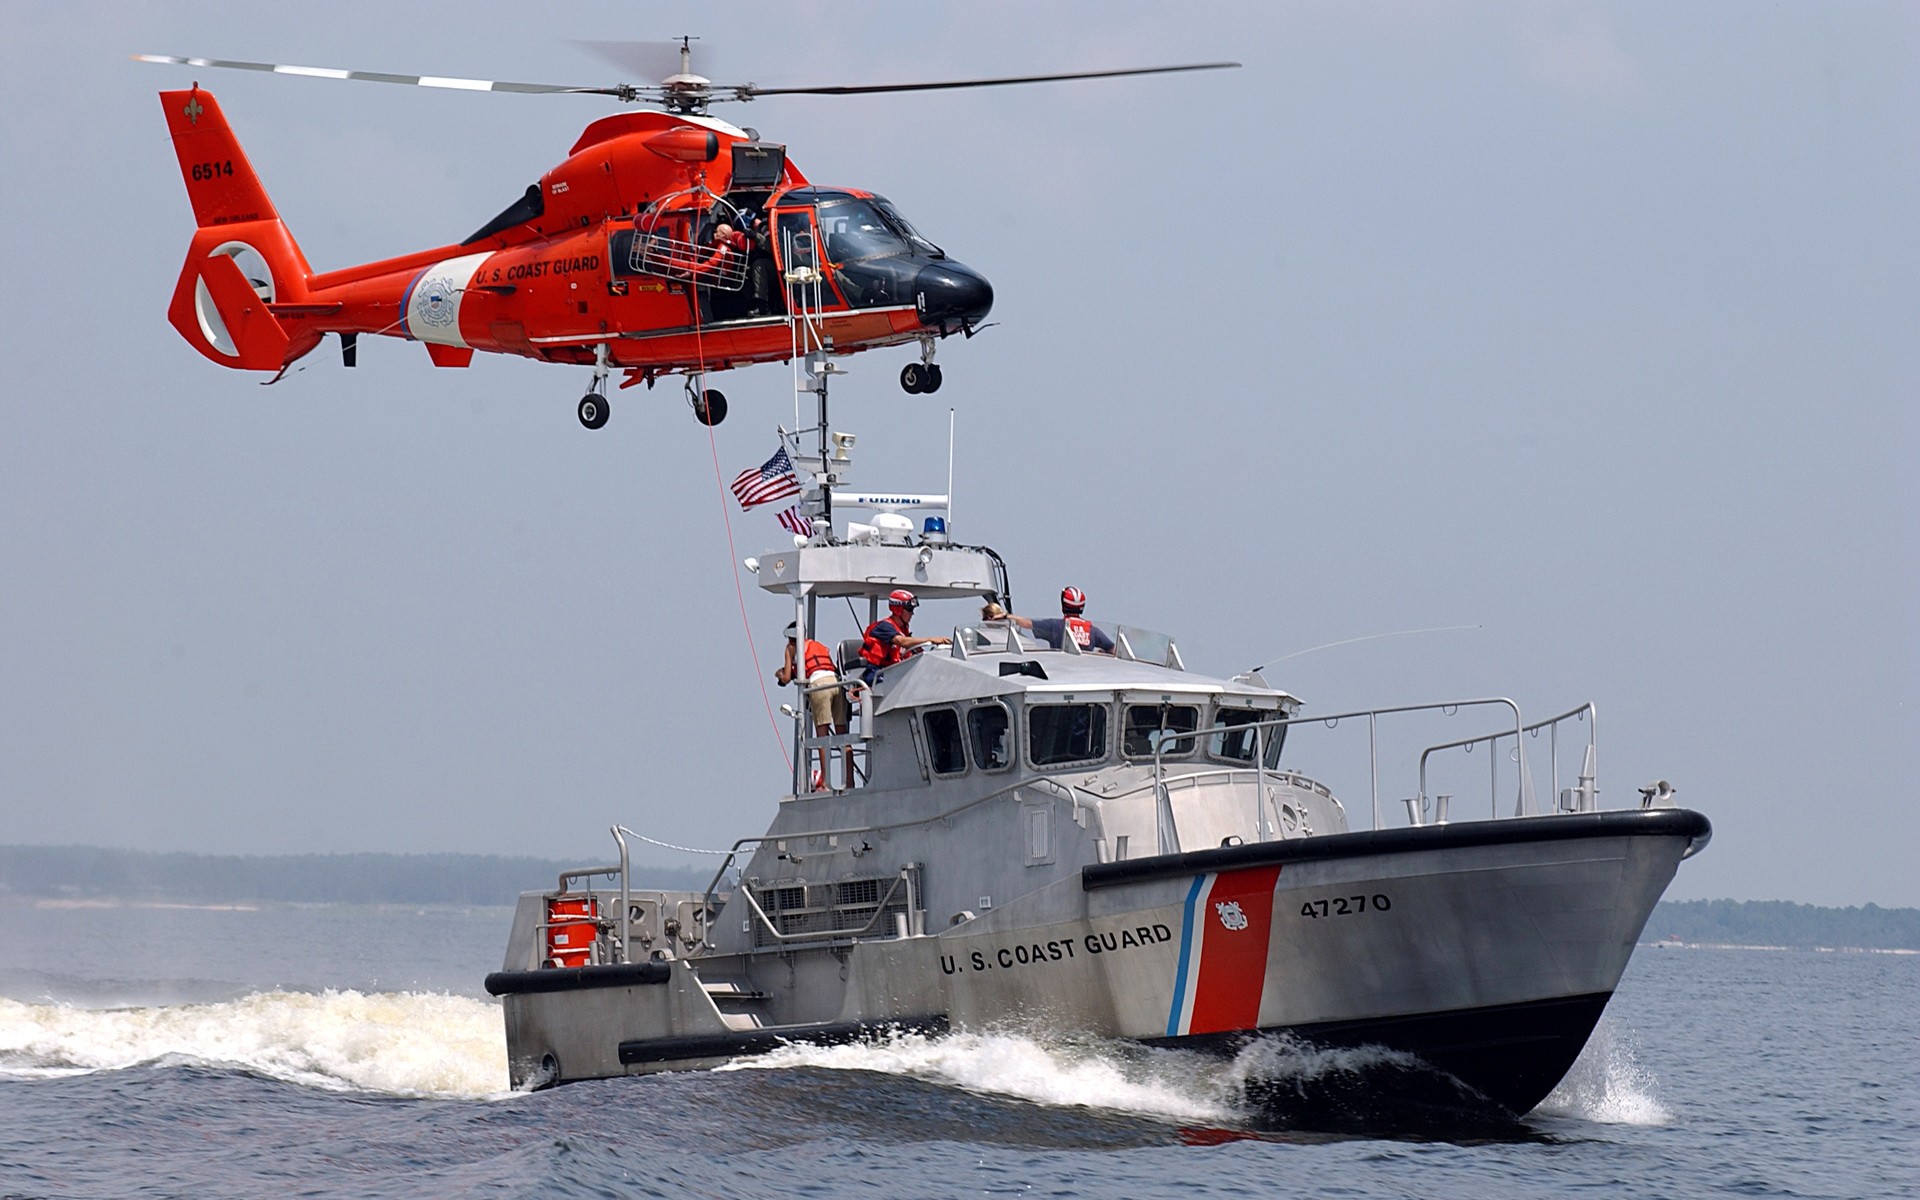 General 1920x1200 coast guard helicopters vehicle aircraft boat United States Coast Guard